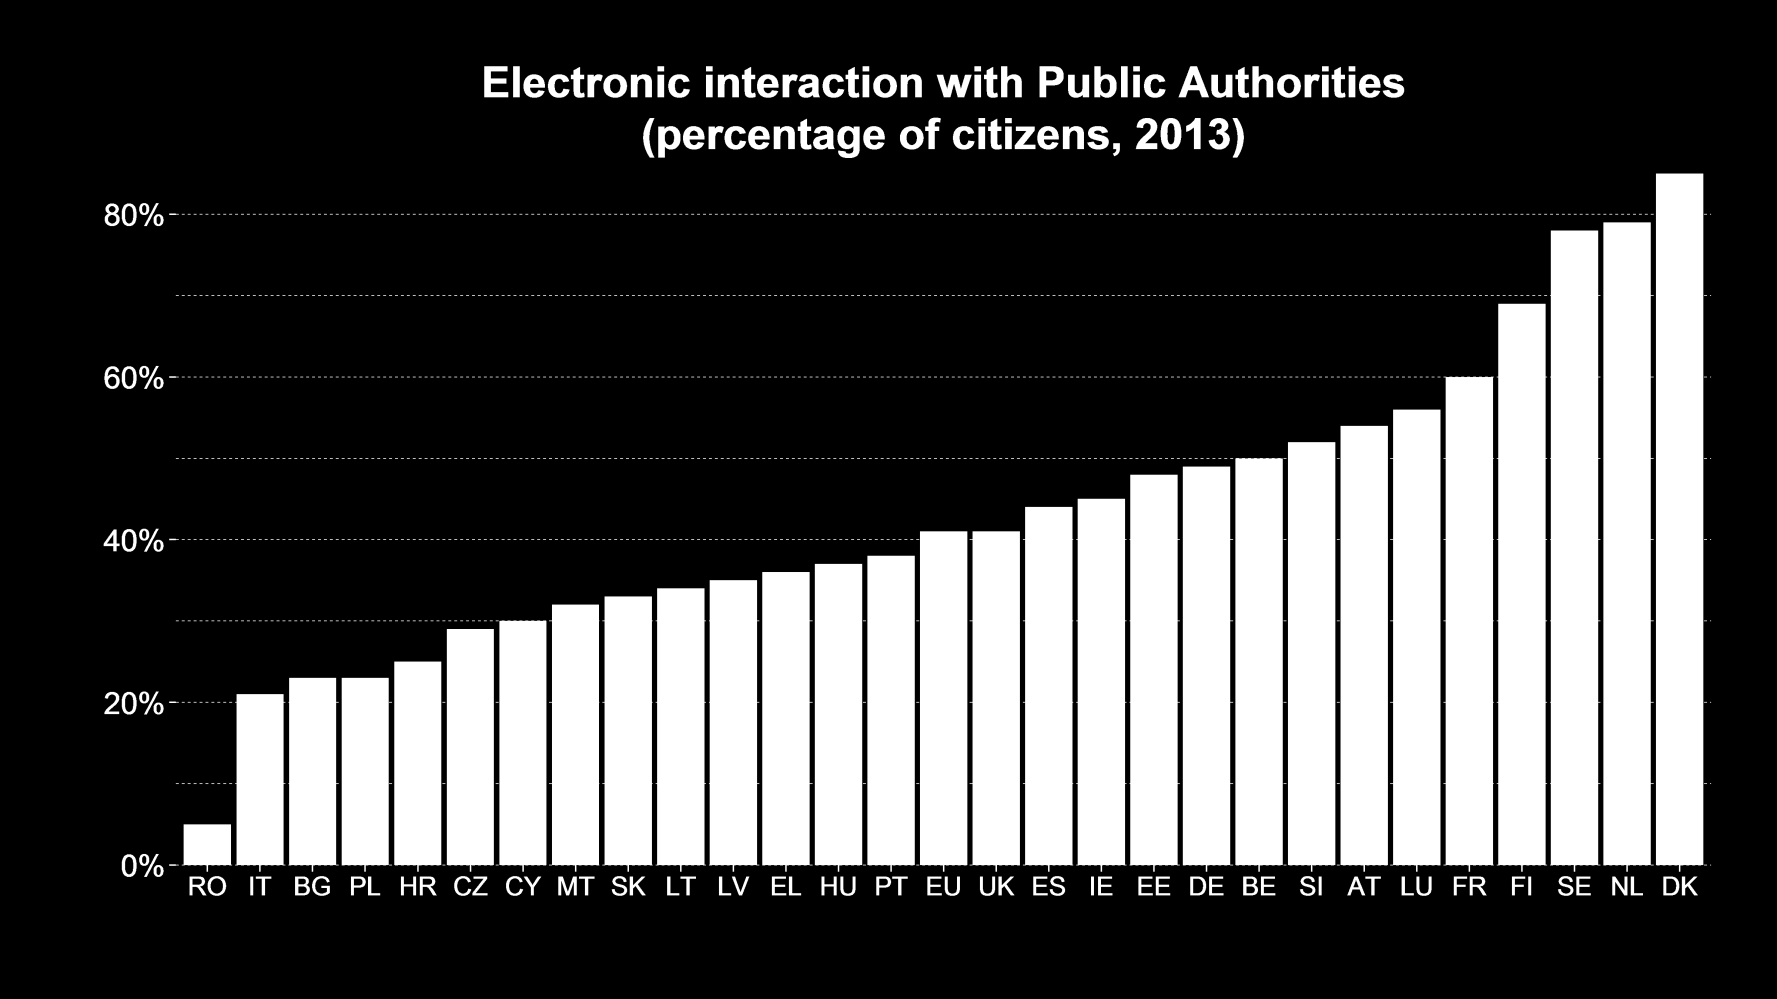 50% of population using egovernment In the EU, 41% of citizens interacted with Public Authorities in an electronic